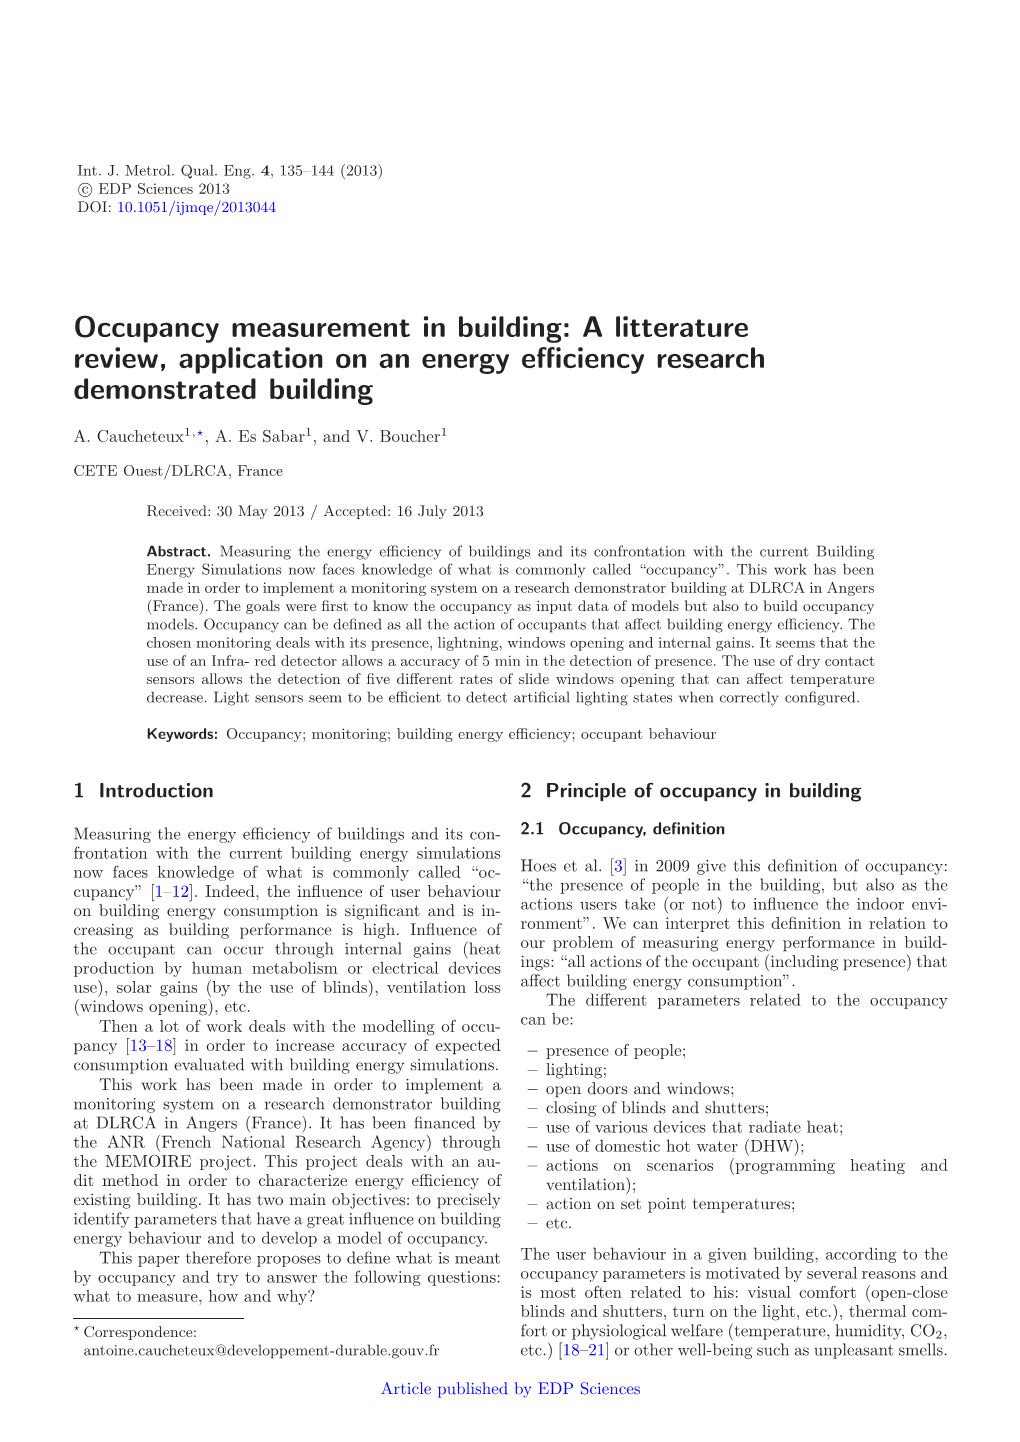 Occupancy Measurement in Building: a Litterature Review, Application on an Energy Eﬃciency Research Demonstrated Building